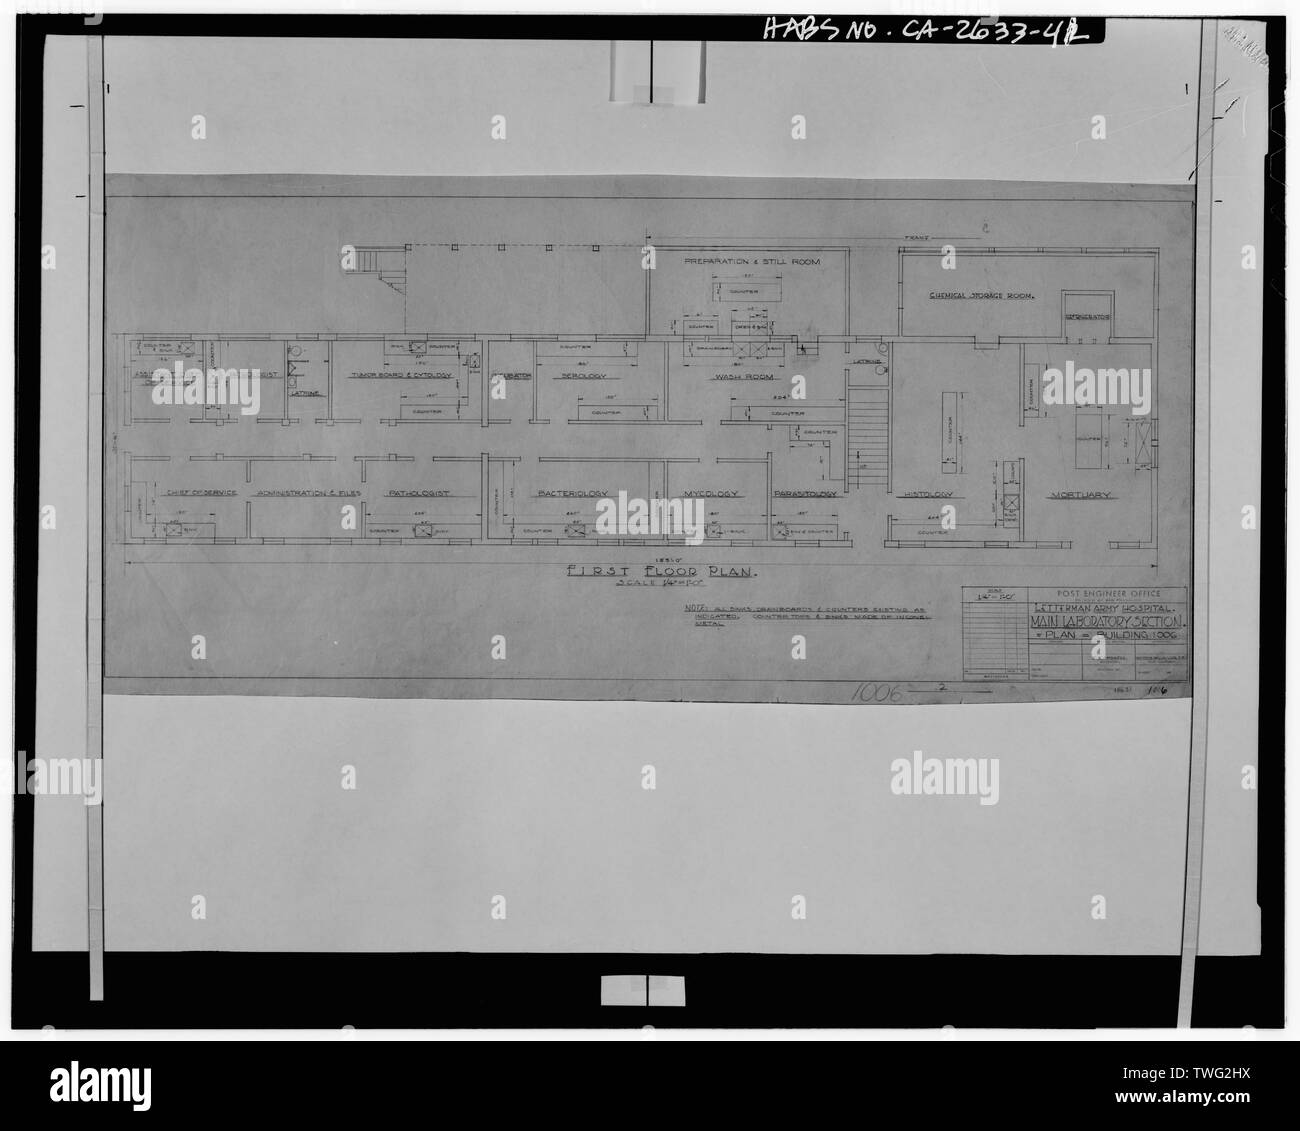 Post Engineer Office, Presidio of San Francisco, Letterman Army Hospital,  First Floor Plan, Main Laboratory Section and Plan, Building 1006. no date  BUILDING 1006. - Presidio of San Francisco, Letterman General Hospital,